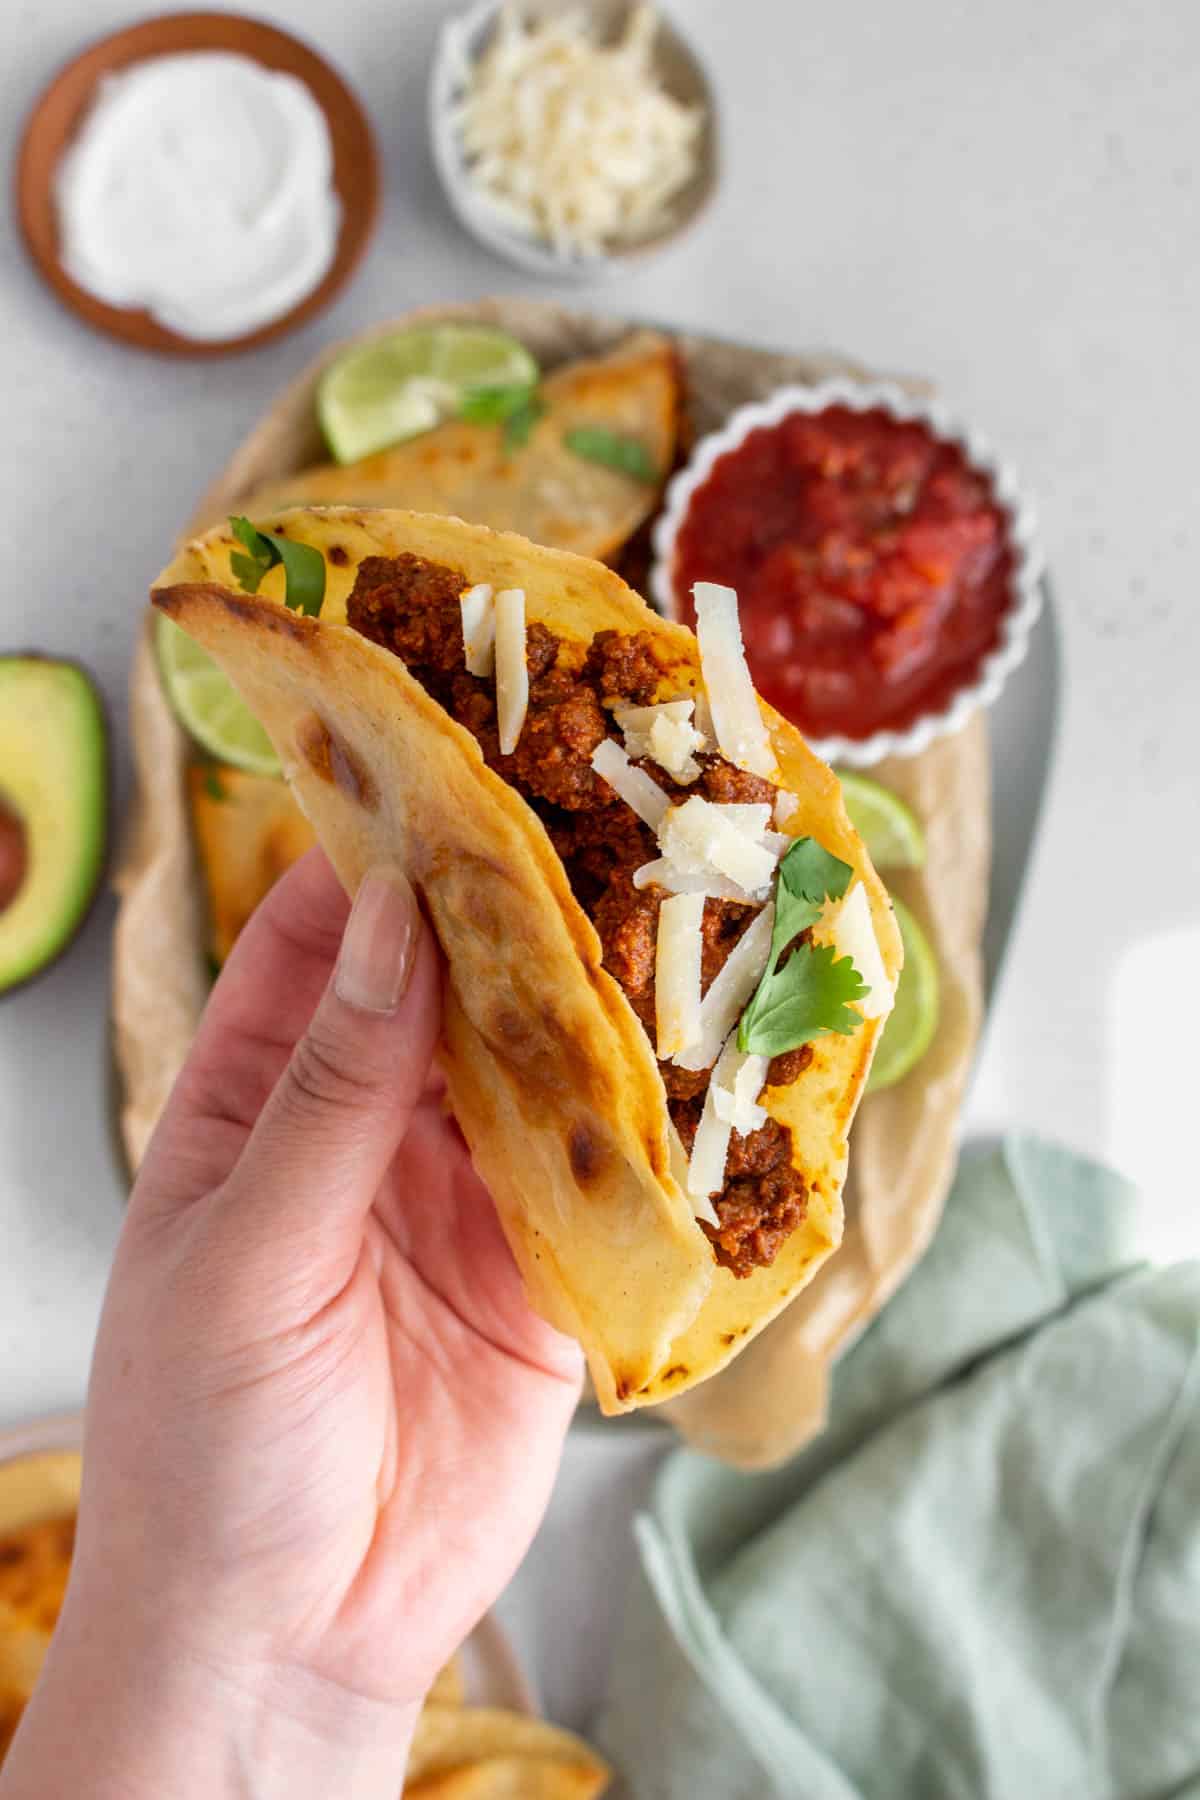 A hand holding up a ground beef taco.